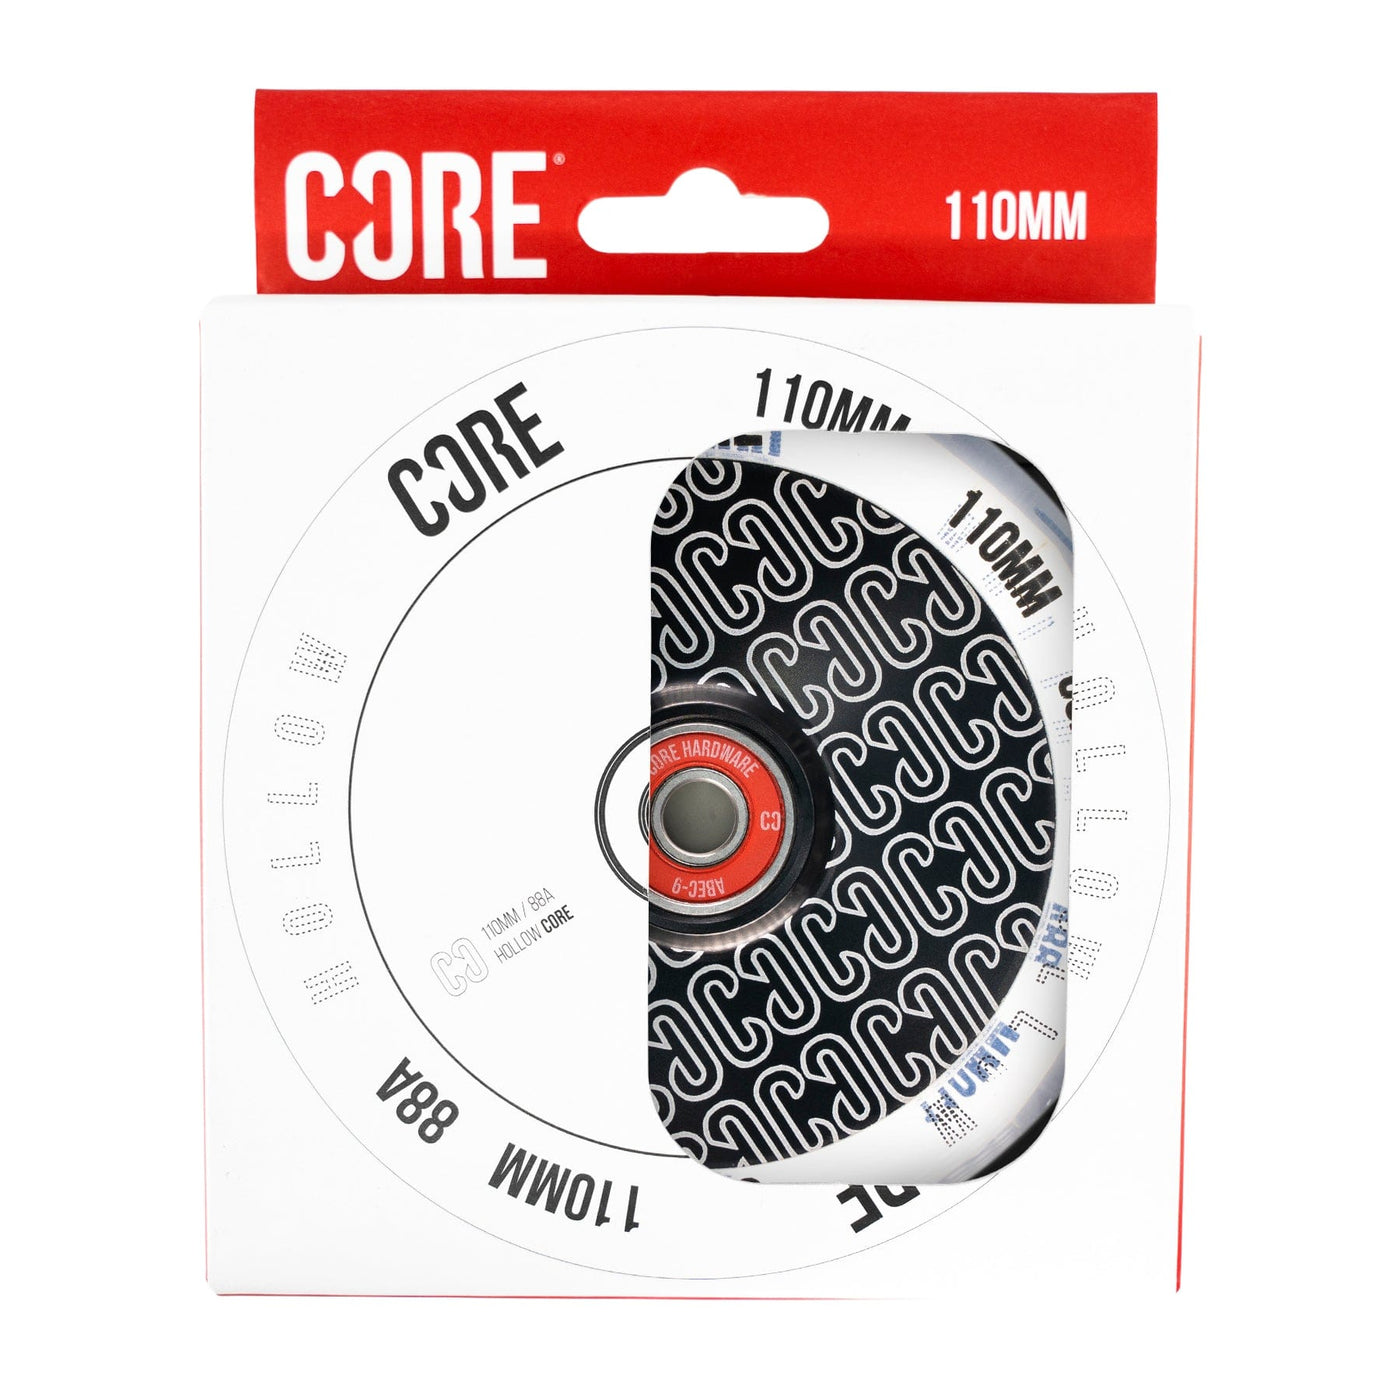 CORE Hollow Stunt Scooter Wheel Repeat 110mm - Clear/Black 5060719852647